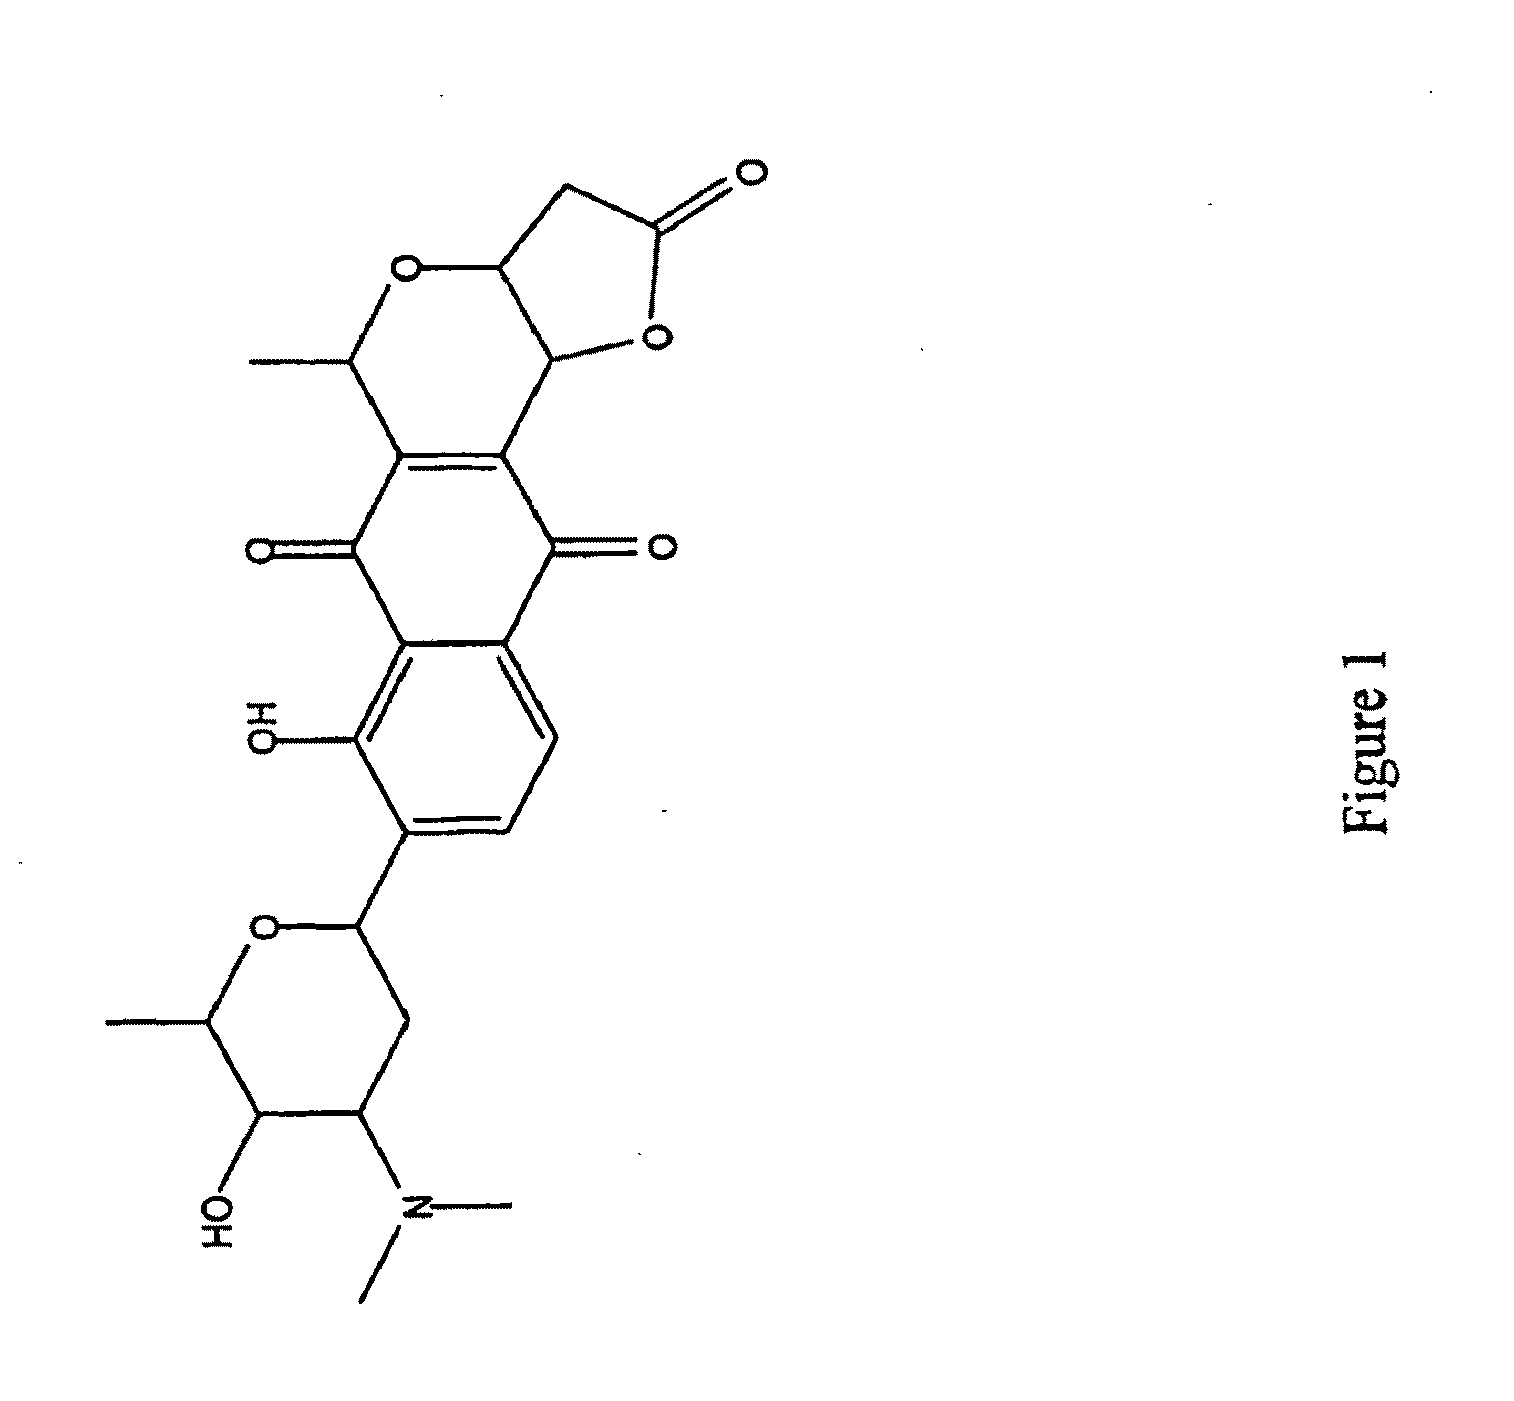 Streptomyces-derived antimicrobial compound and method of using same against antibiotic-resistant bacteria